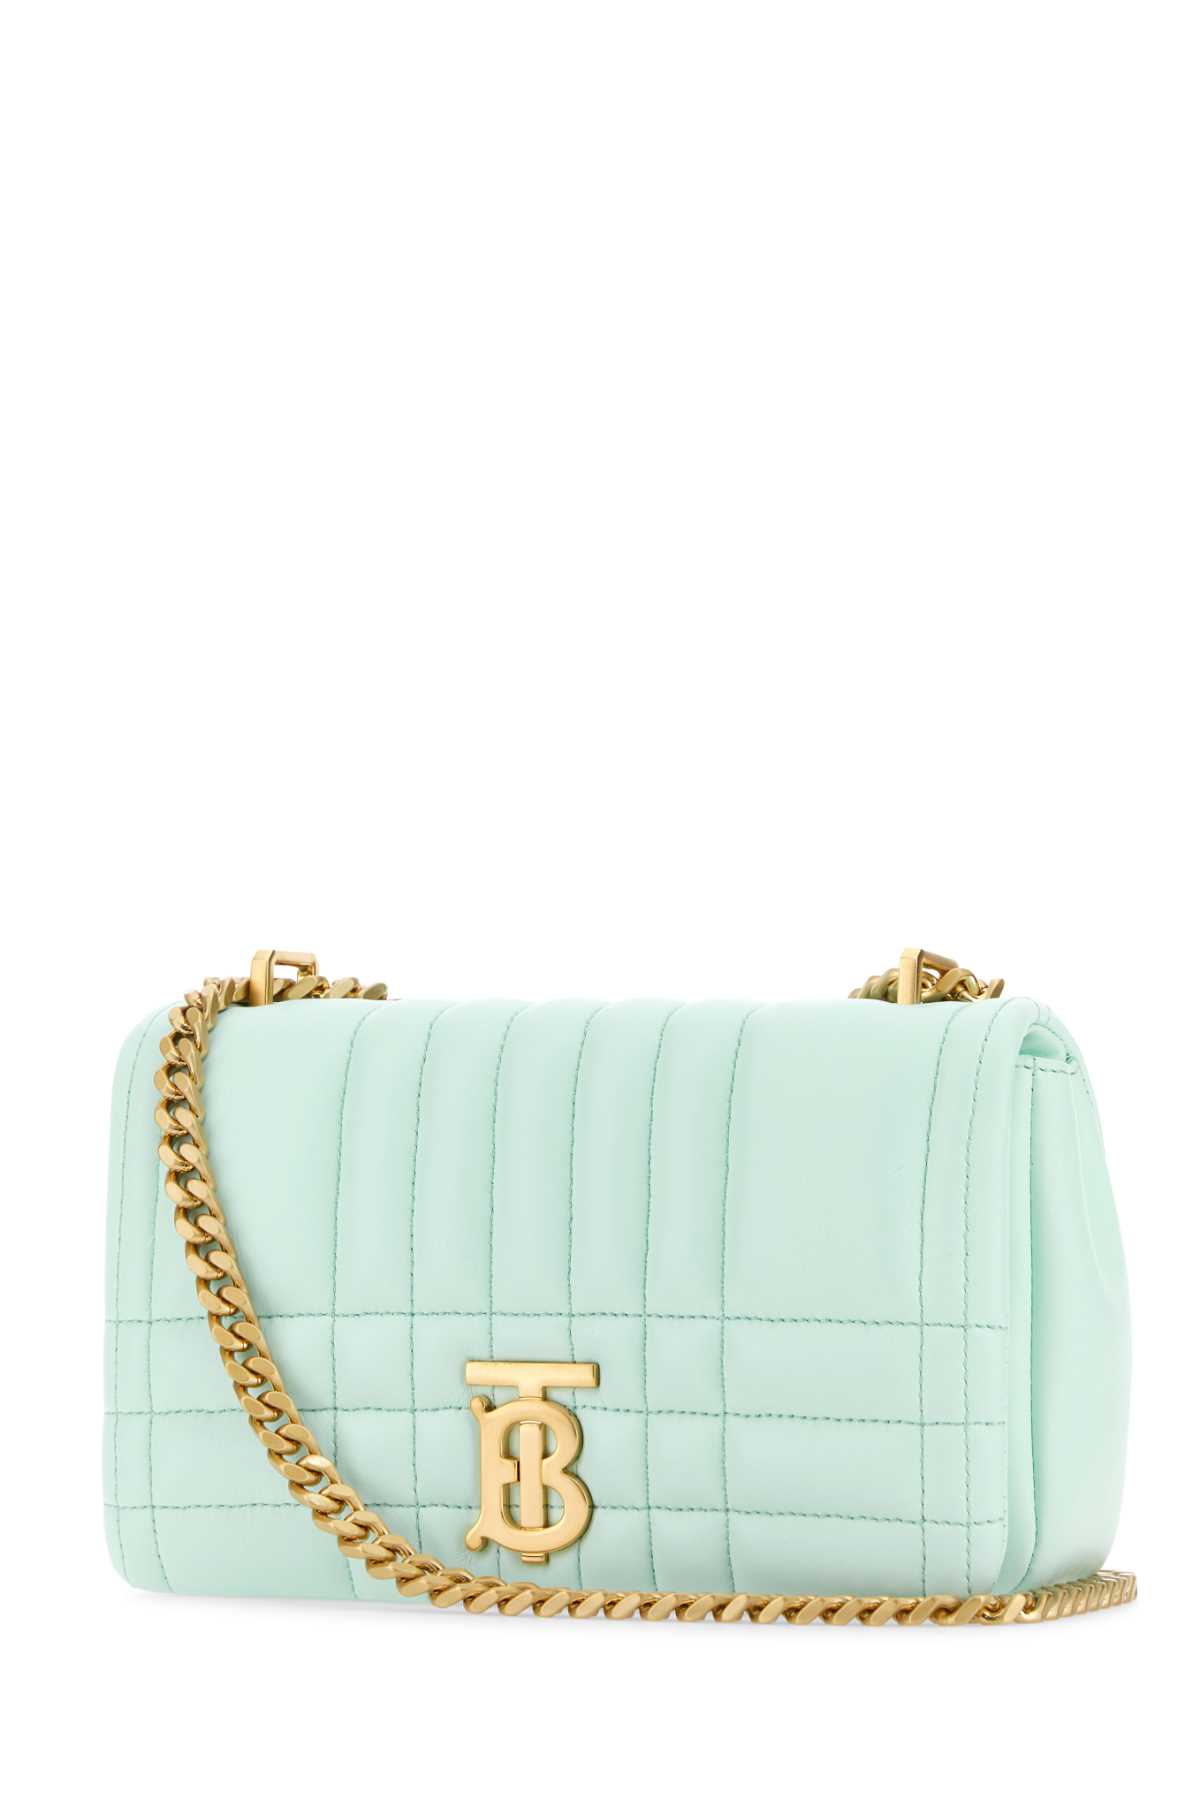 Burberry Pastel Light-blue Leather Small Lola Shoulder Bag In Coolmint